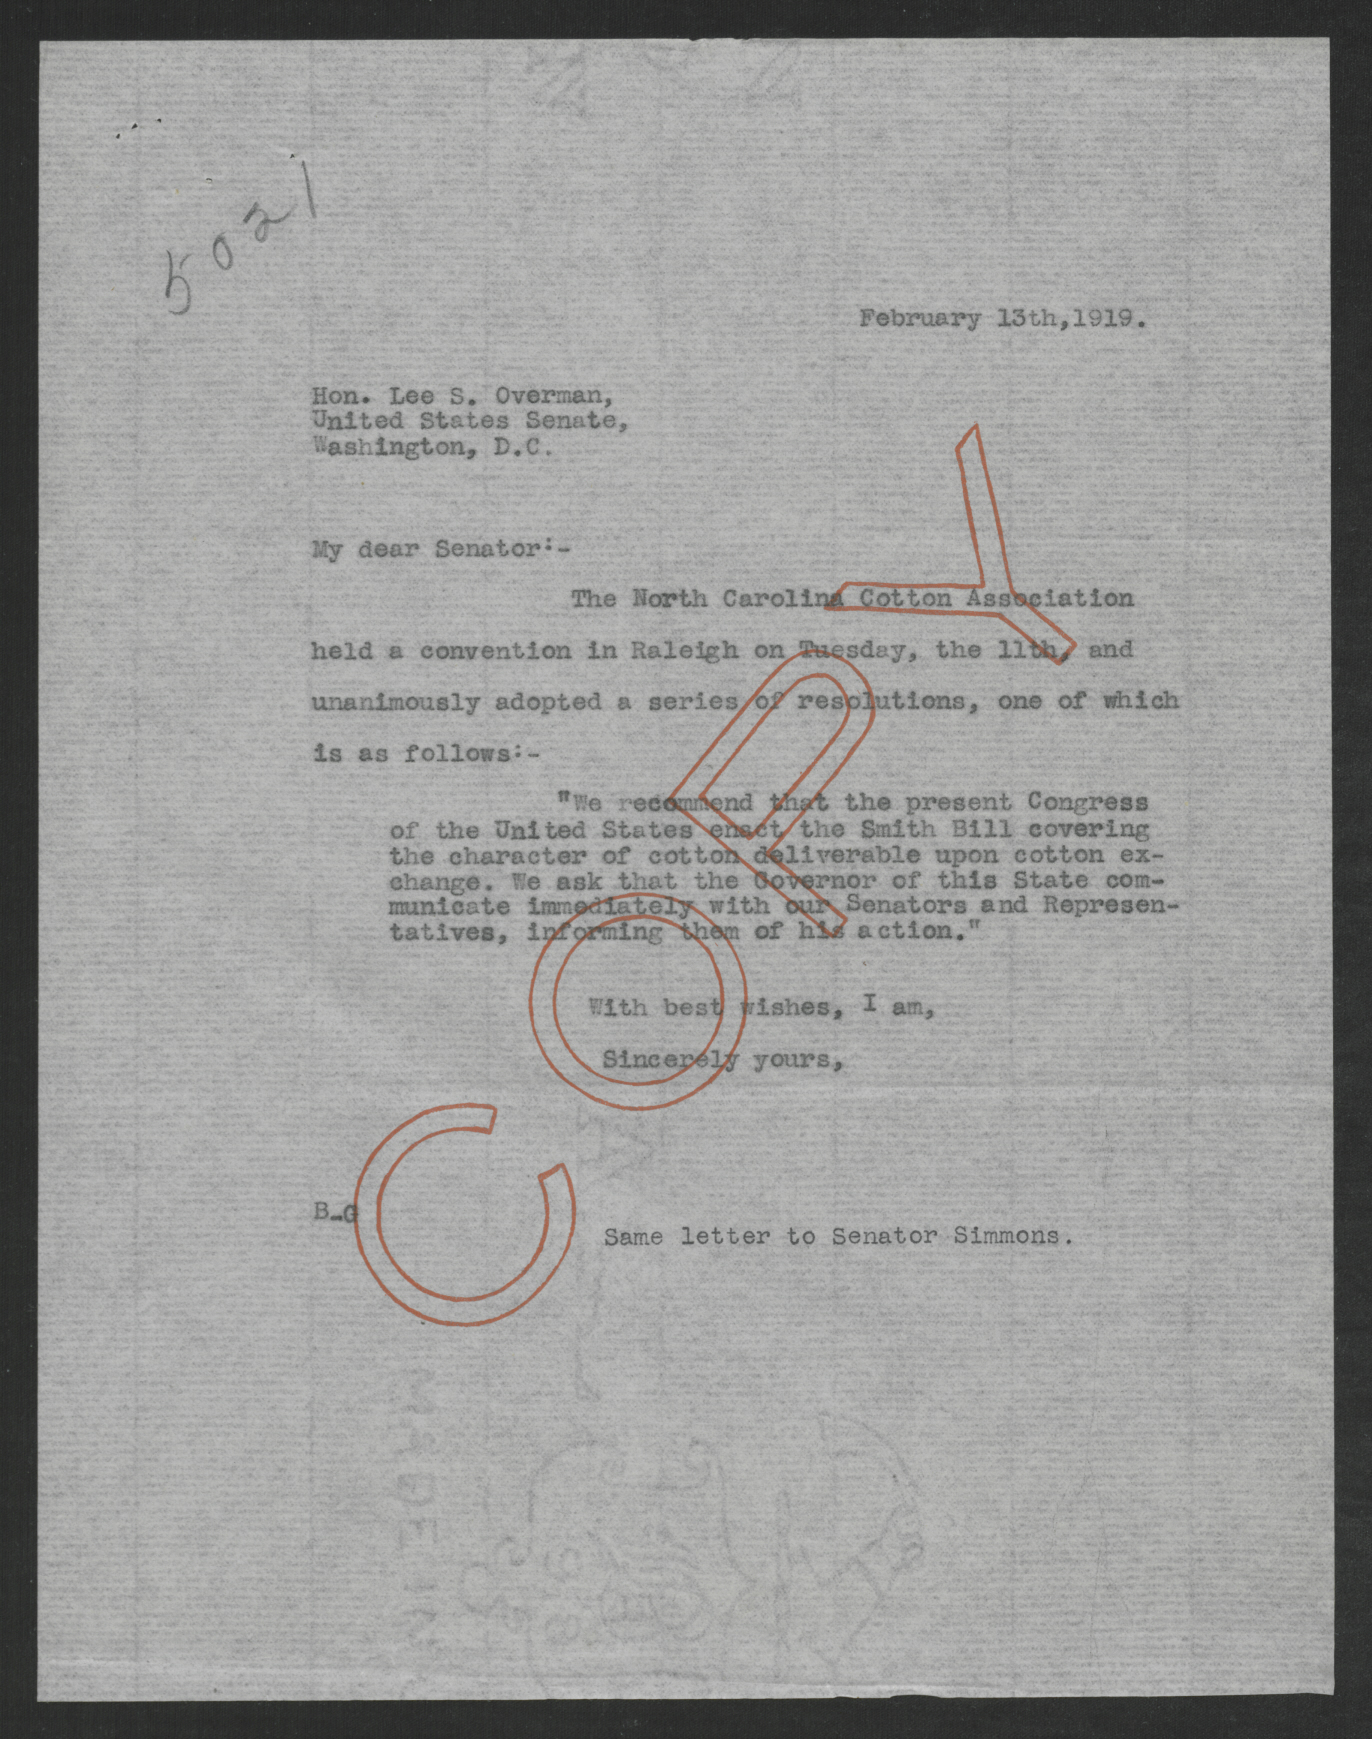 Letter from Thomas W. Bickett to Lee S. Overman, February 13, 1919